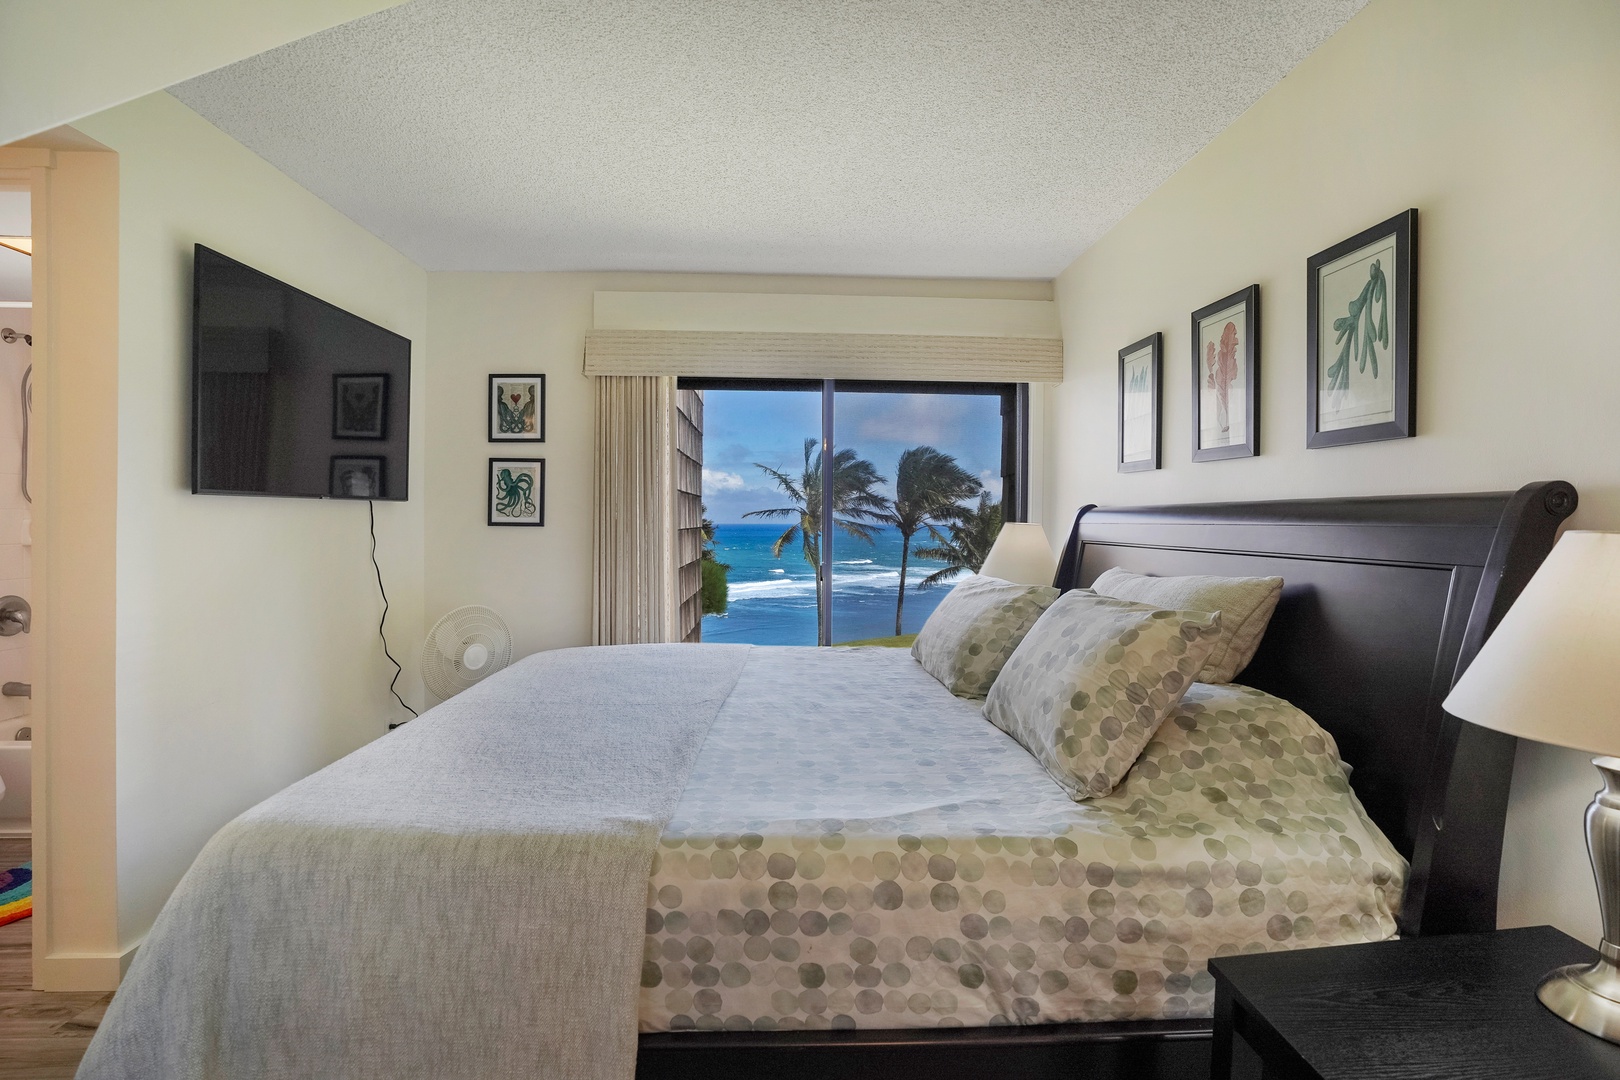 Princeville Vacation Rentals, Sealodge Villa H5 - The primary has another television